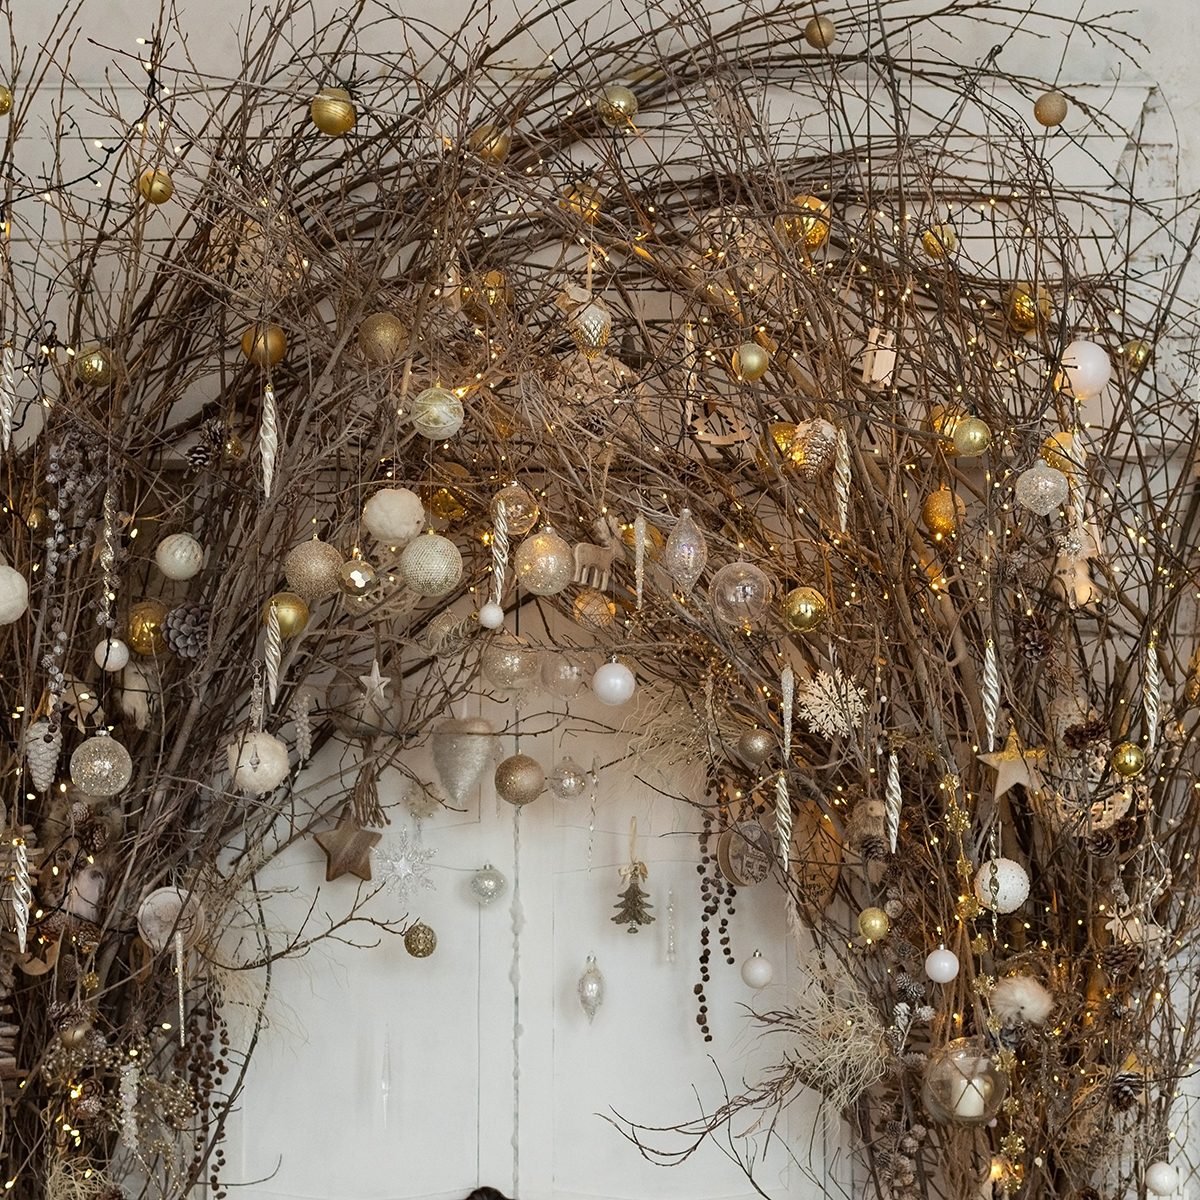 Christmas decorations with natural details: branches with garland lights and christmas balls. Eco decor in interior concept. Creative christmas tree.